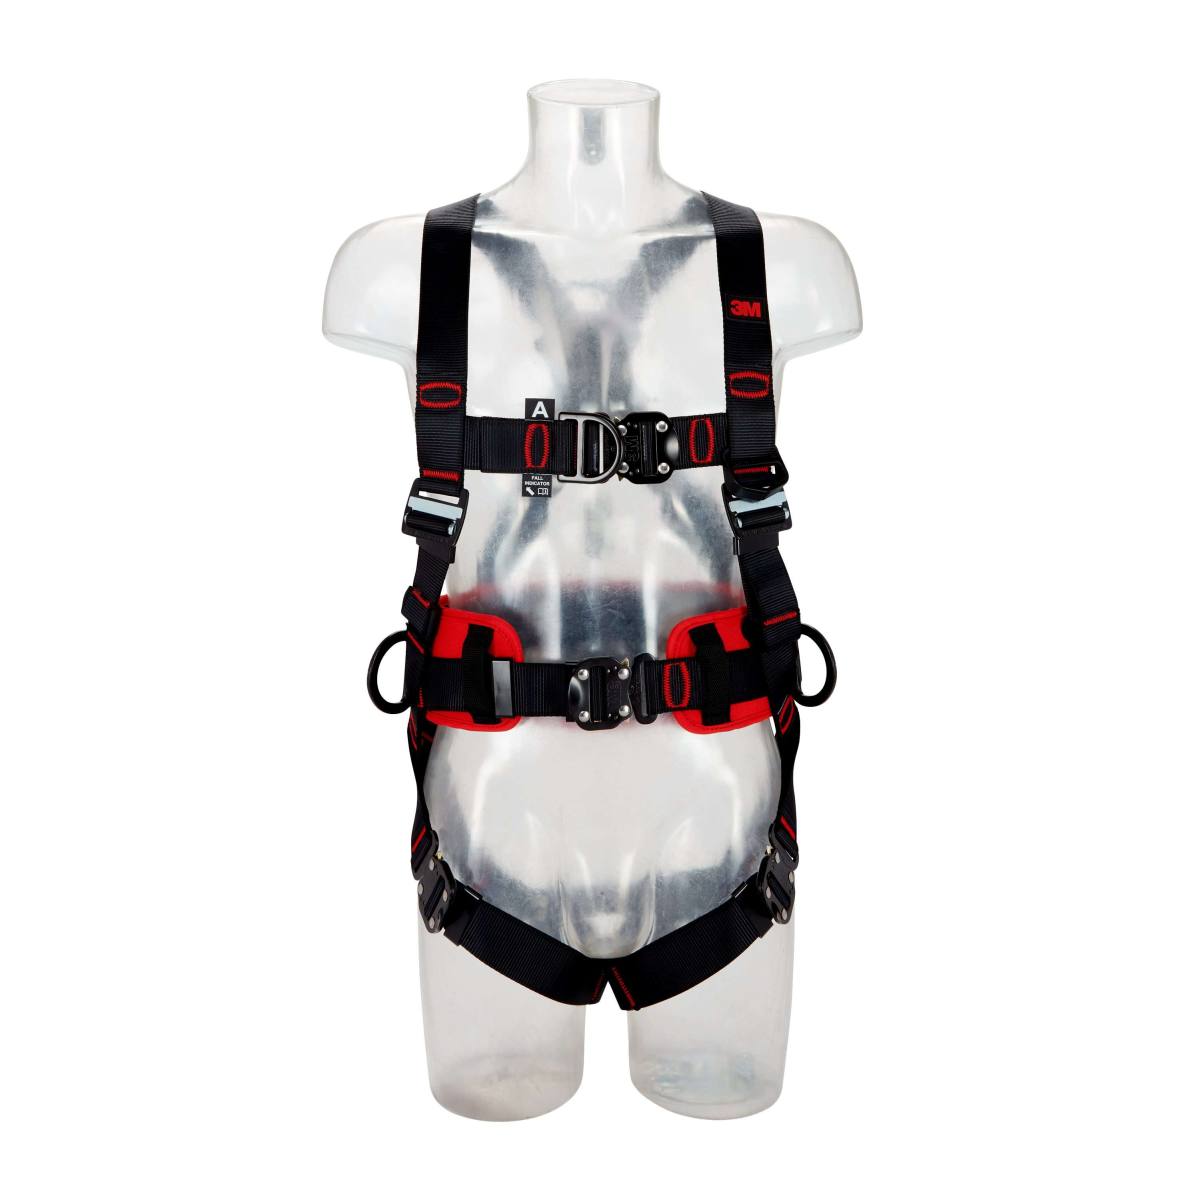 3M PROTECTA full body harness - chest and rear fall arrest eyelets, comfort harness with side eyelets, automatic buckles, chest and rear fall indicators, belt end depot, label protection with label field, black coated, M/L